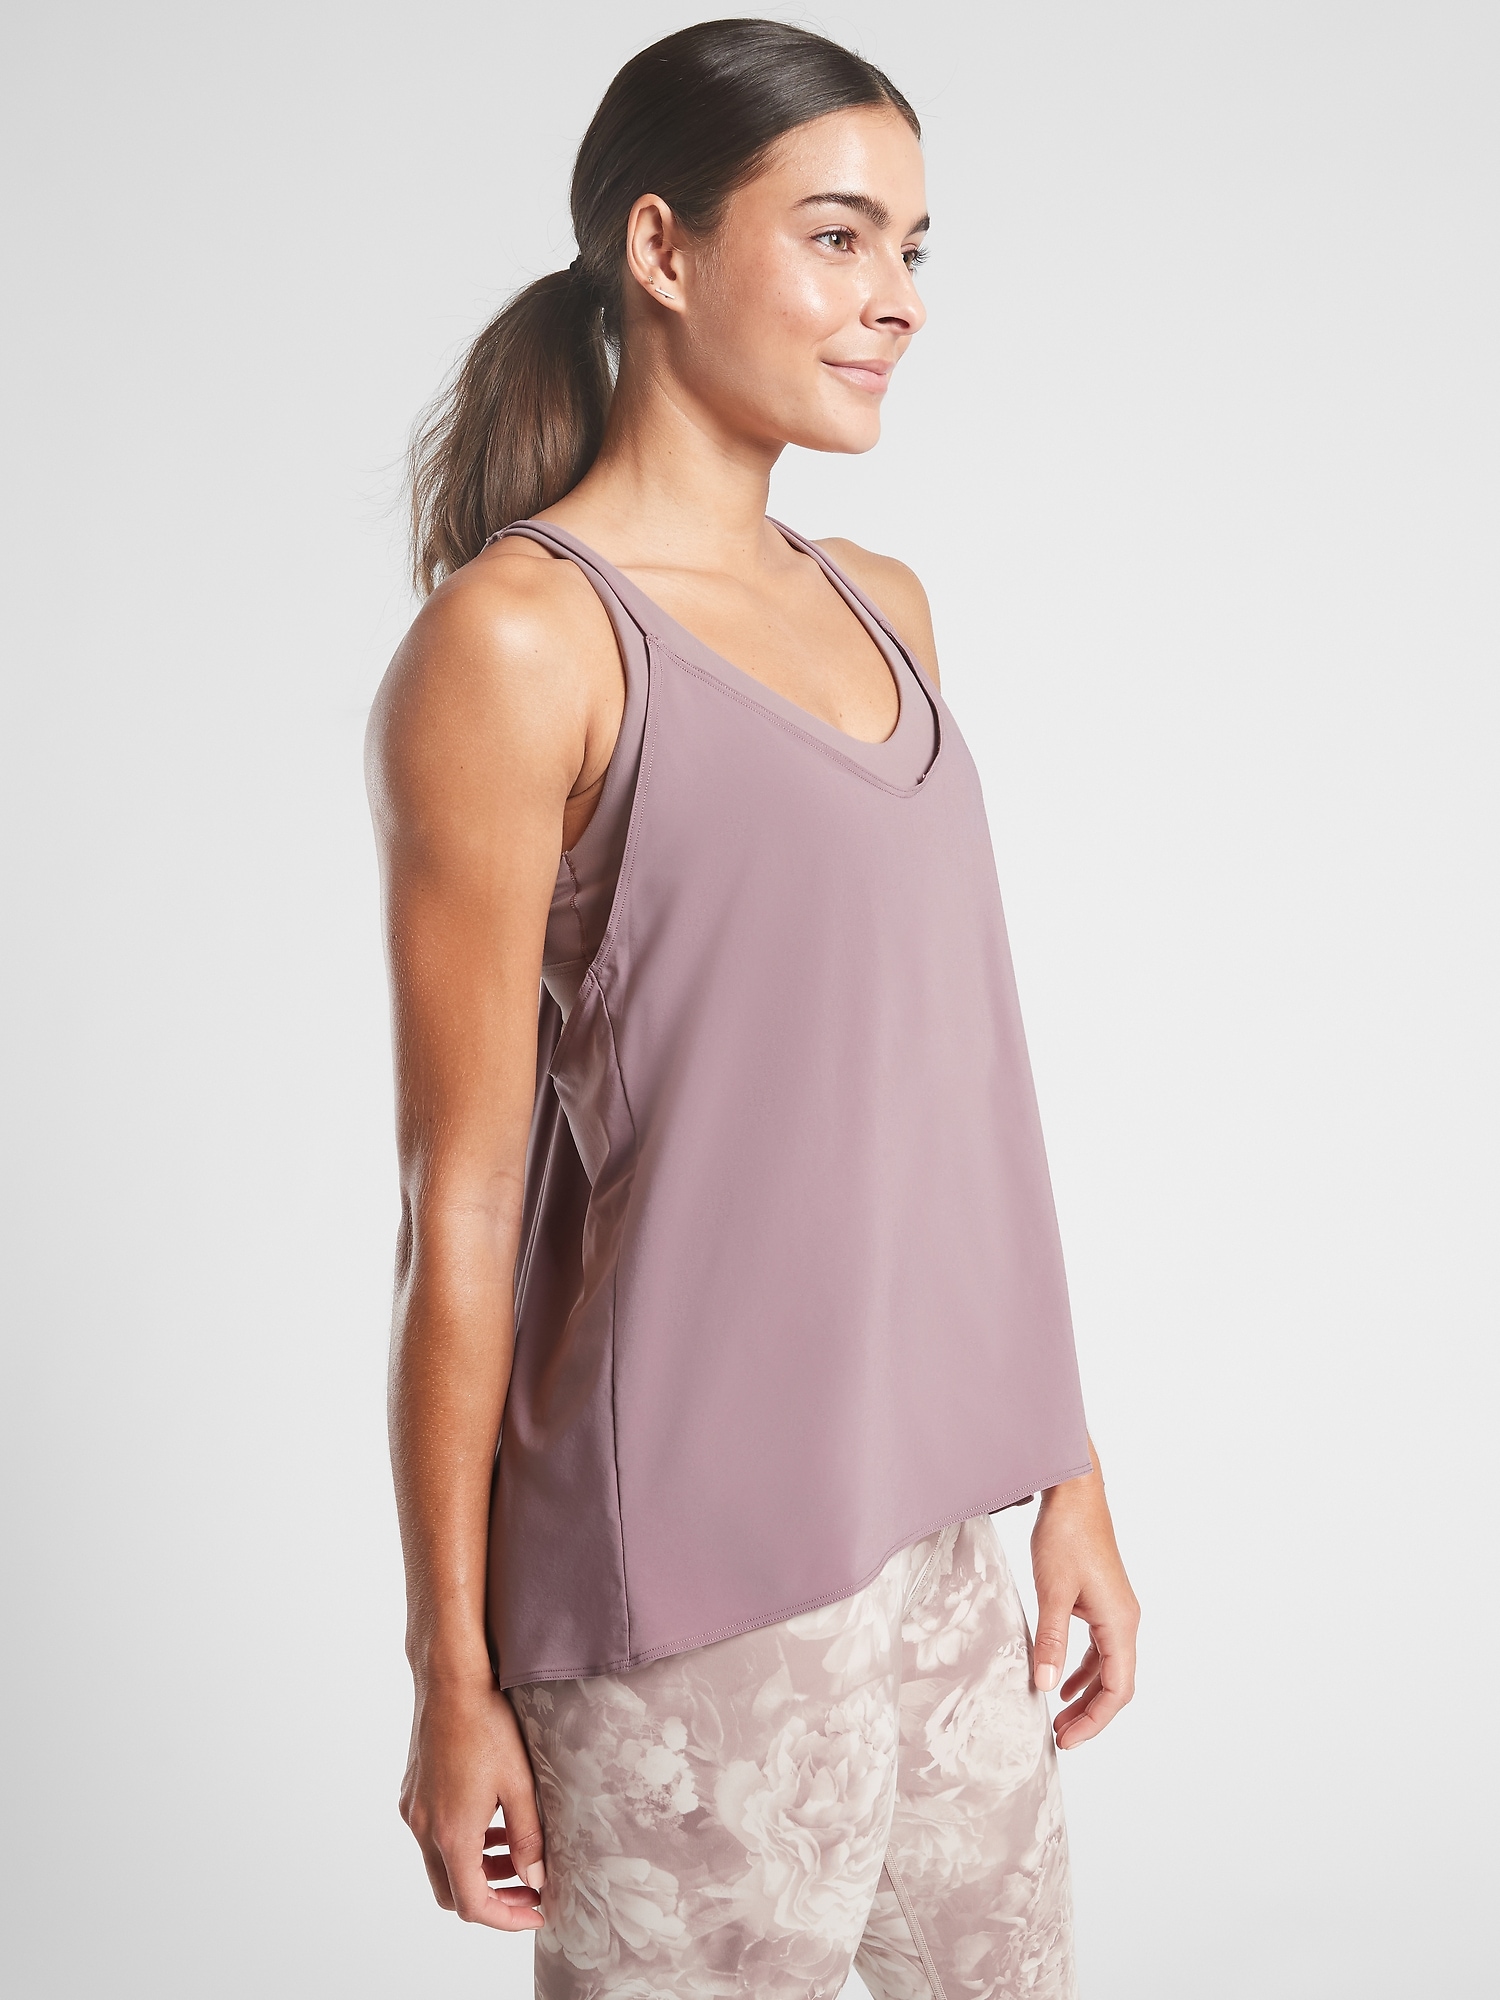 Athleta NWT Women's Solace Support Top Size Small Color Agate Purple/ Supernova